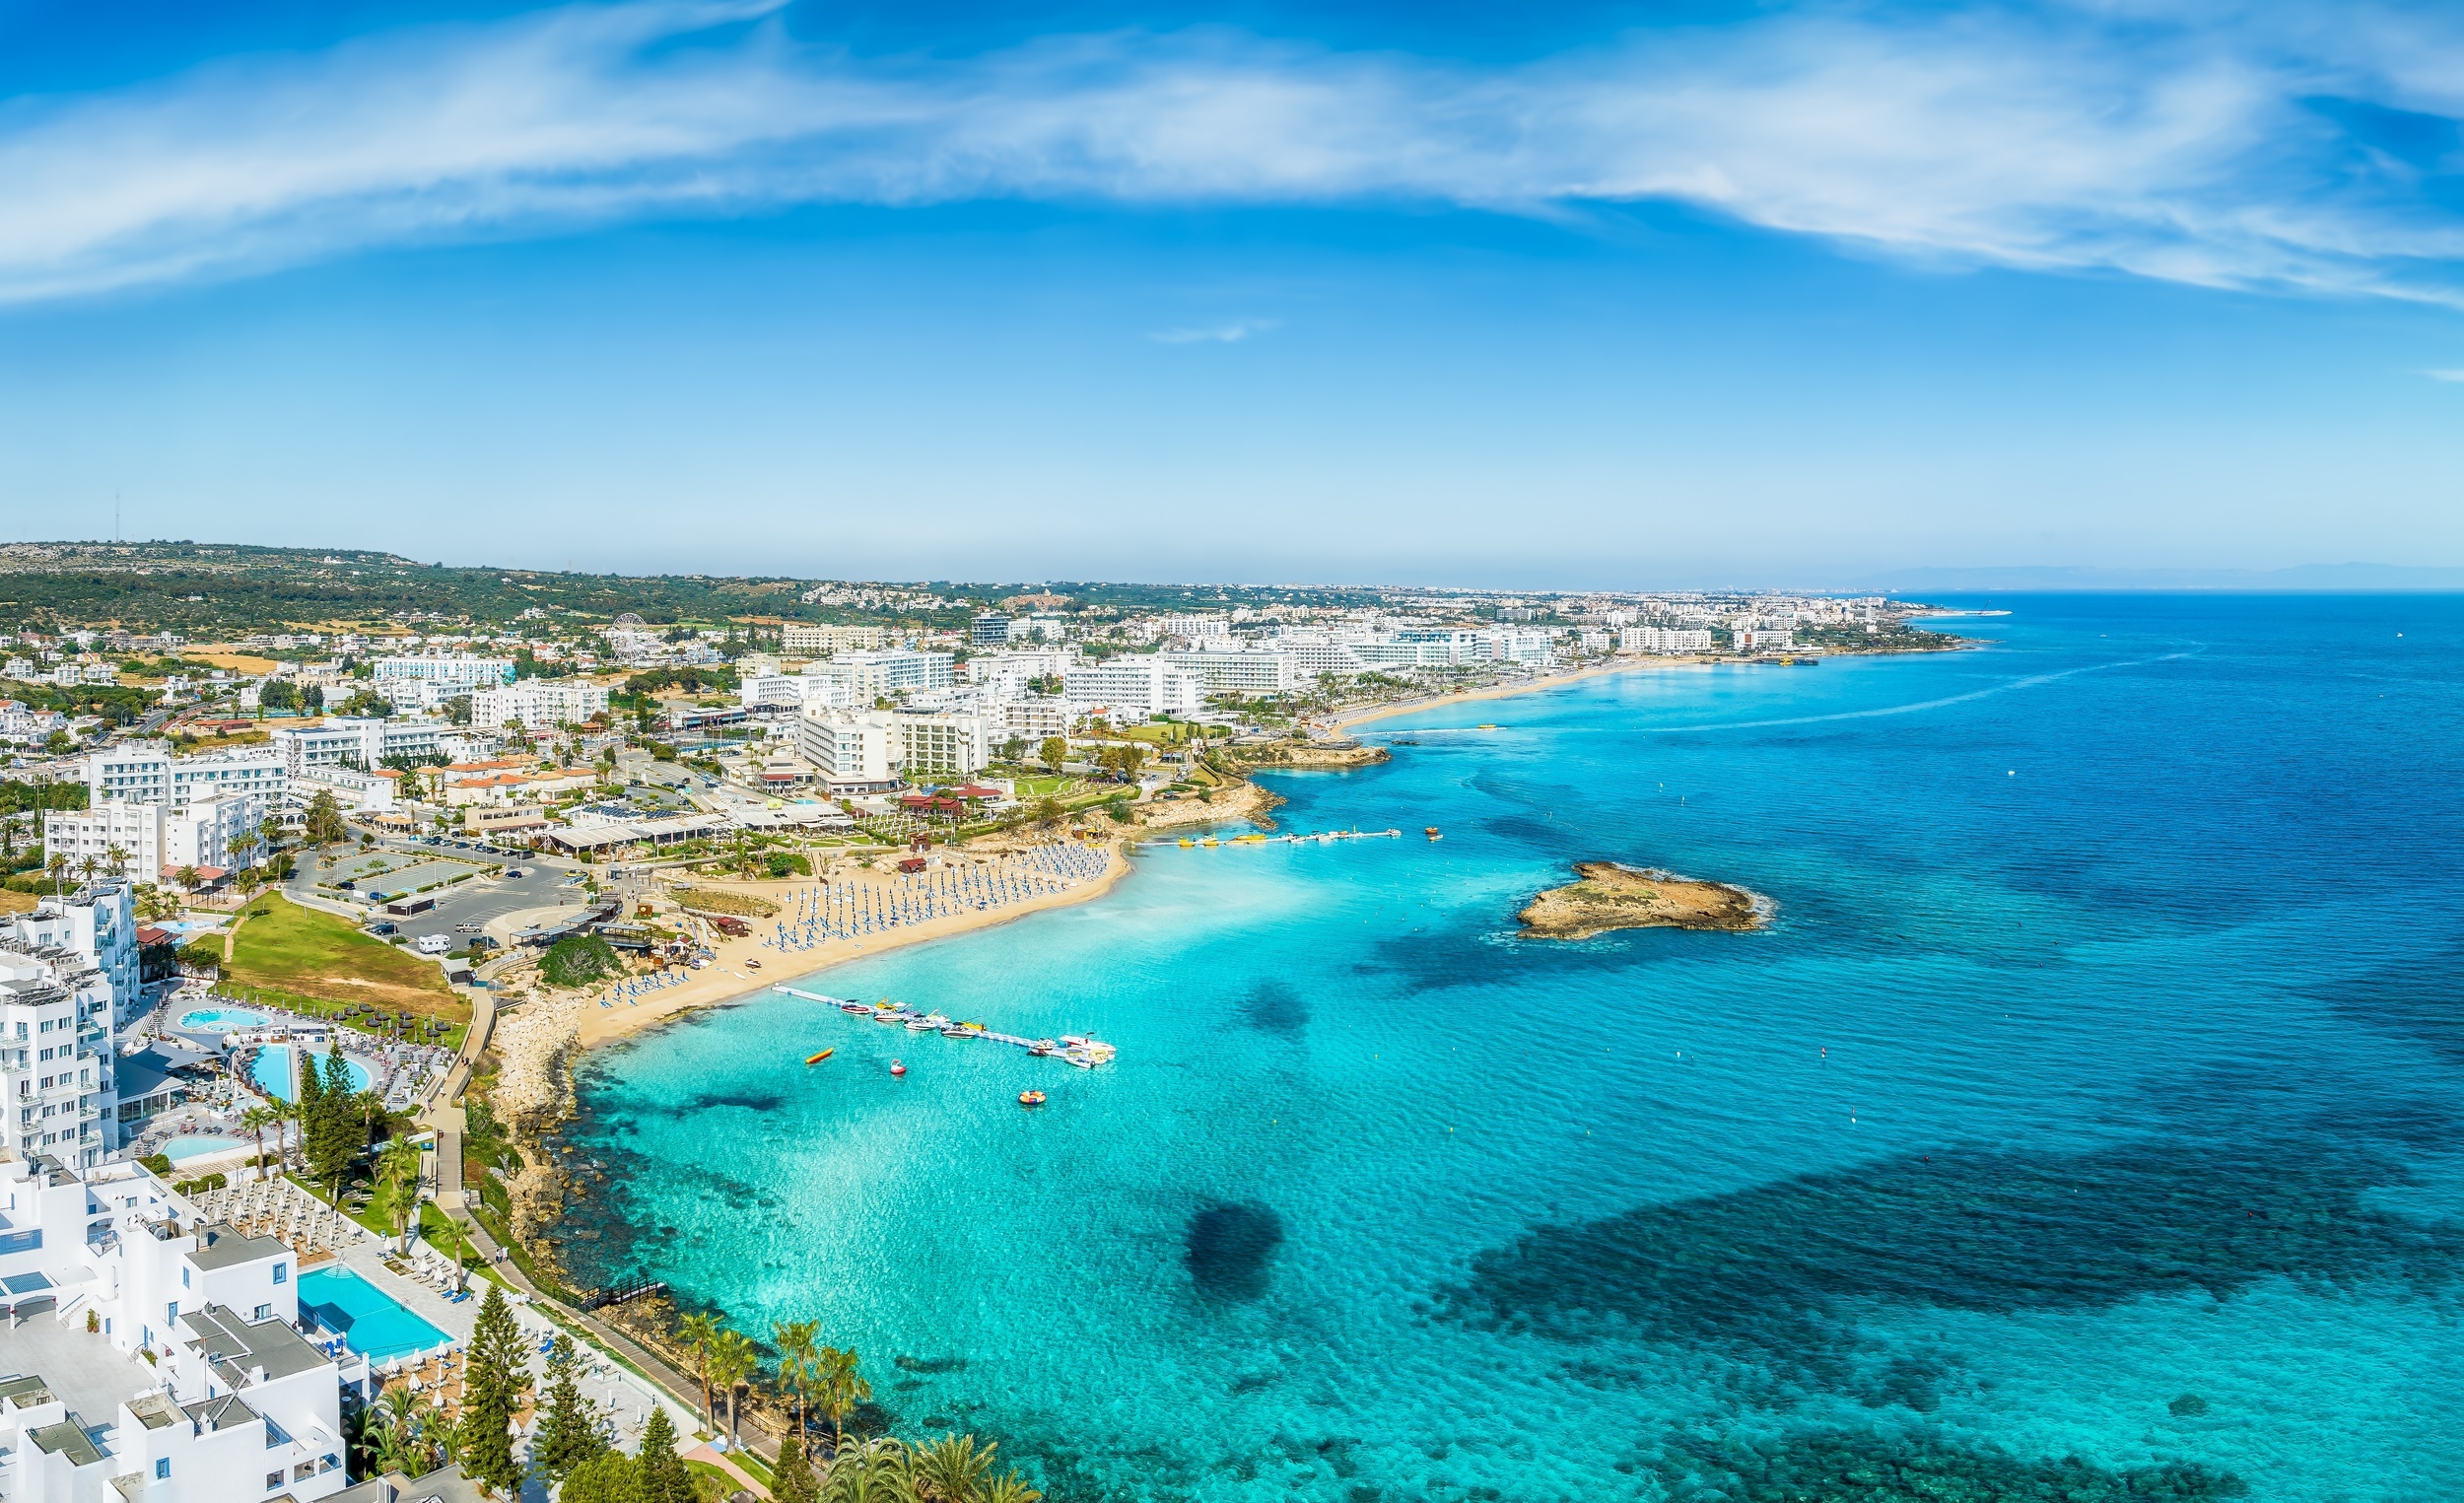 <p>Cyprus is a good place to visit if you want a healthy mix of history, city life, and beaches without sacrificing modern accommodations. And as far as remote islands go, this one is almost in contention for not being considered remote, given its proximity to Turkey, Syria, and Lebanon. </p><p><a href='https://www.msn.com/en-us/community/channel/vid-cj9pqbr0vn9in2b6ddcd8sfgpfq6x6utp44fssrv6mc2gtybw0us'>Follow us on MSN to see more of our exclusive lifestyle content.</a></p>